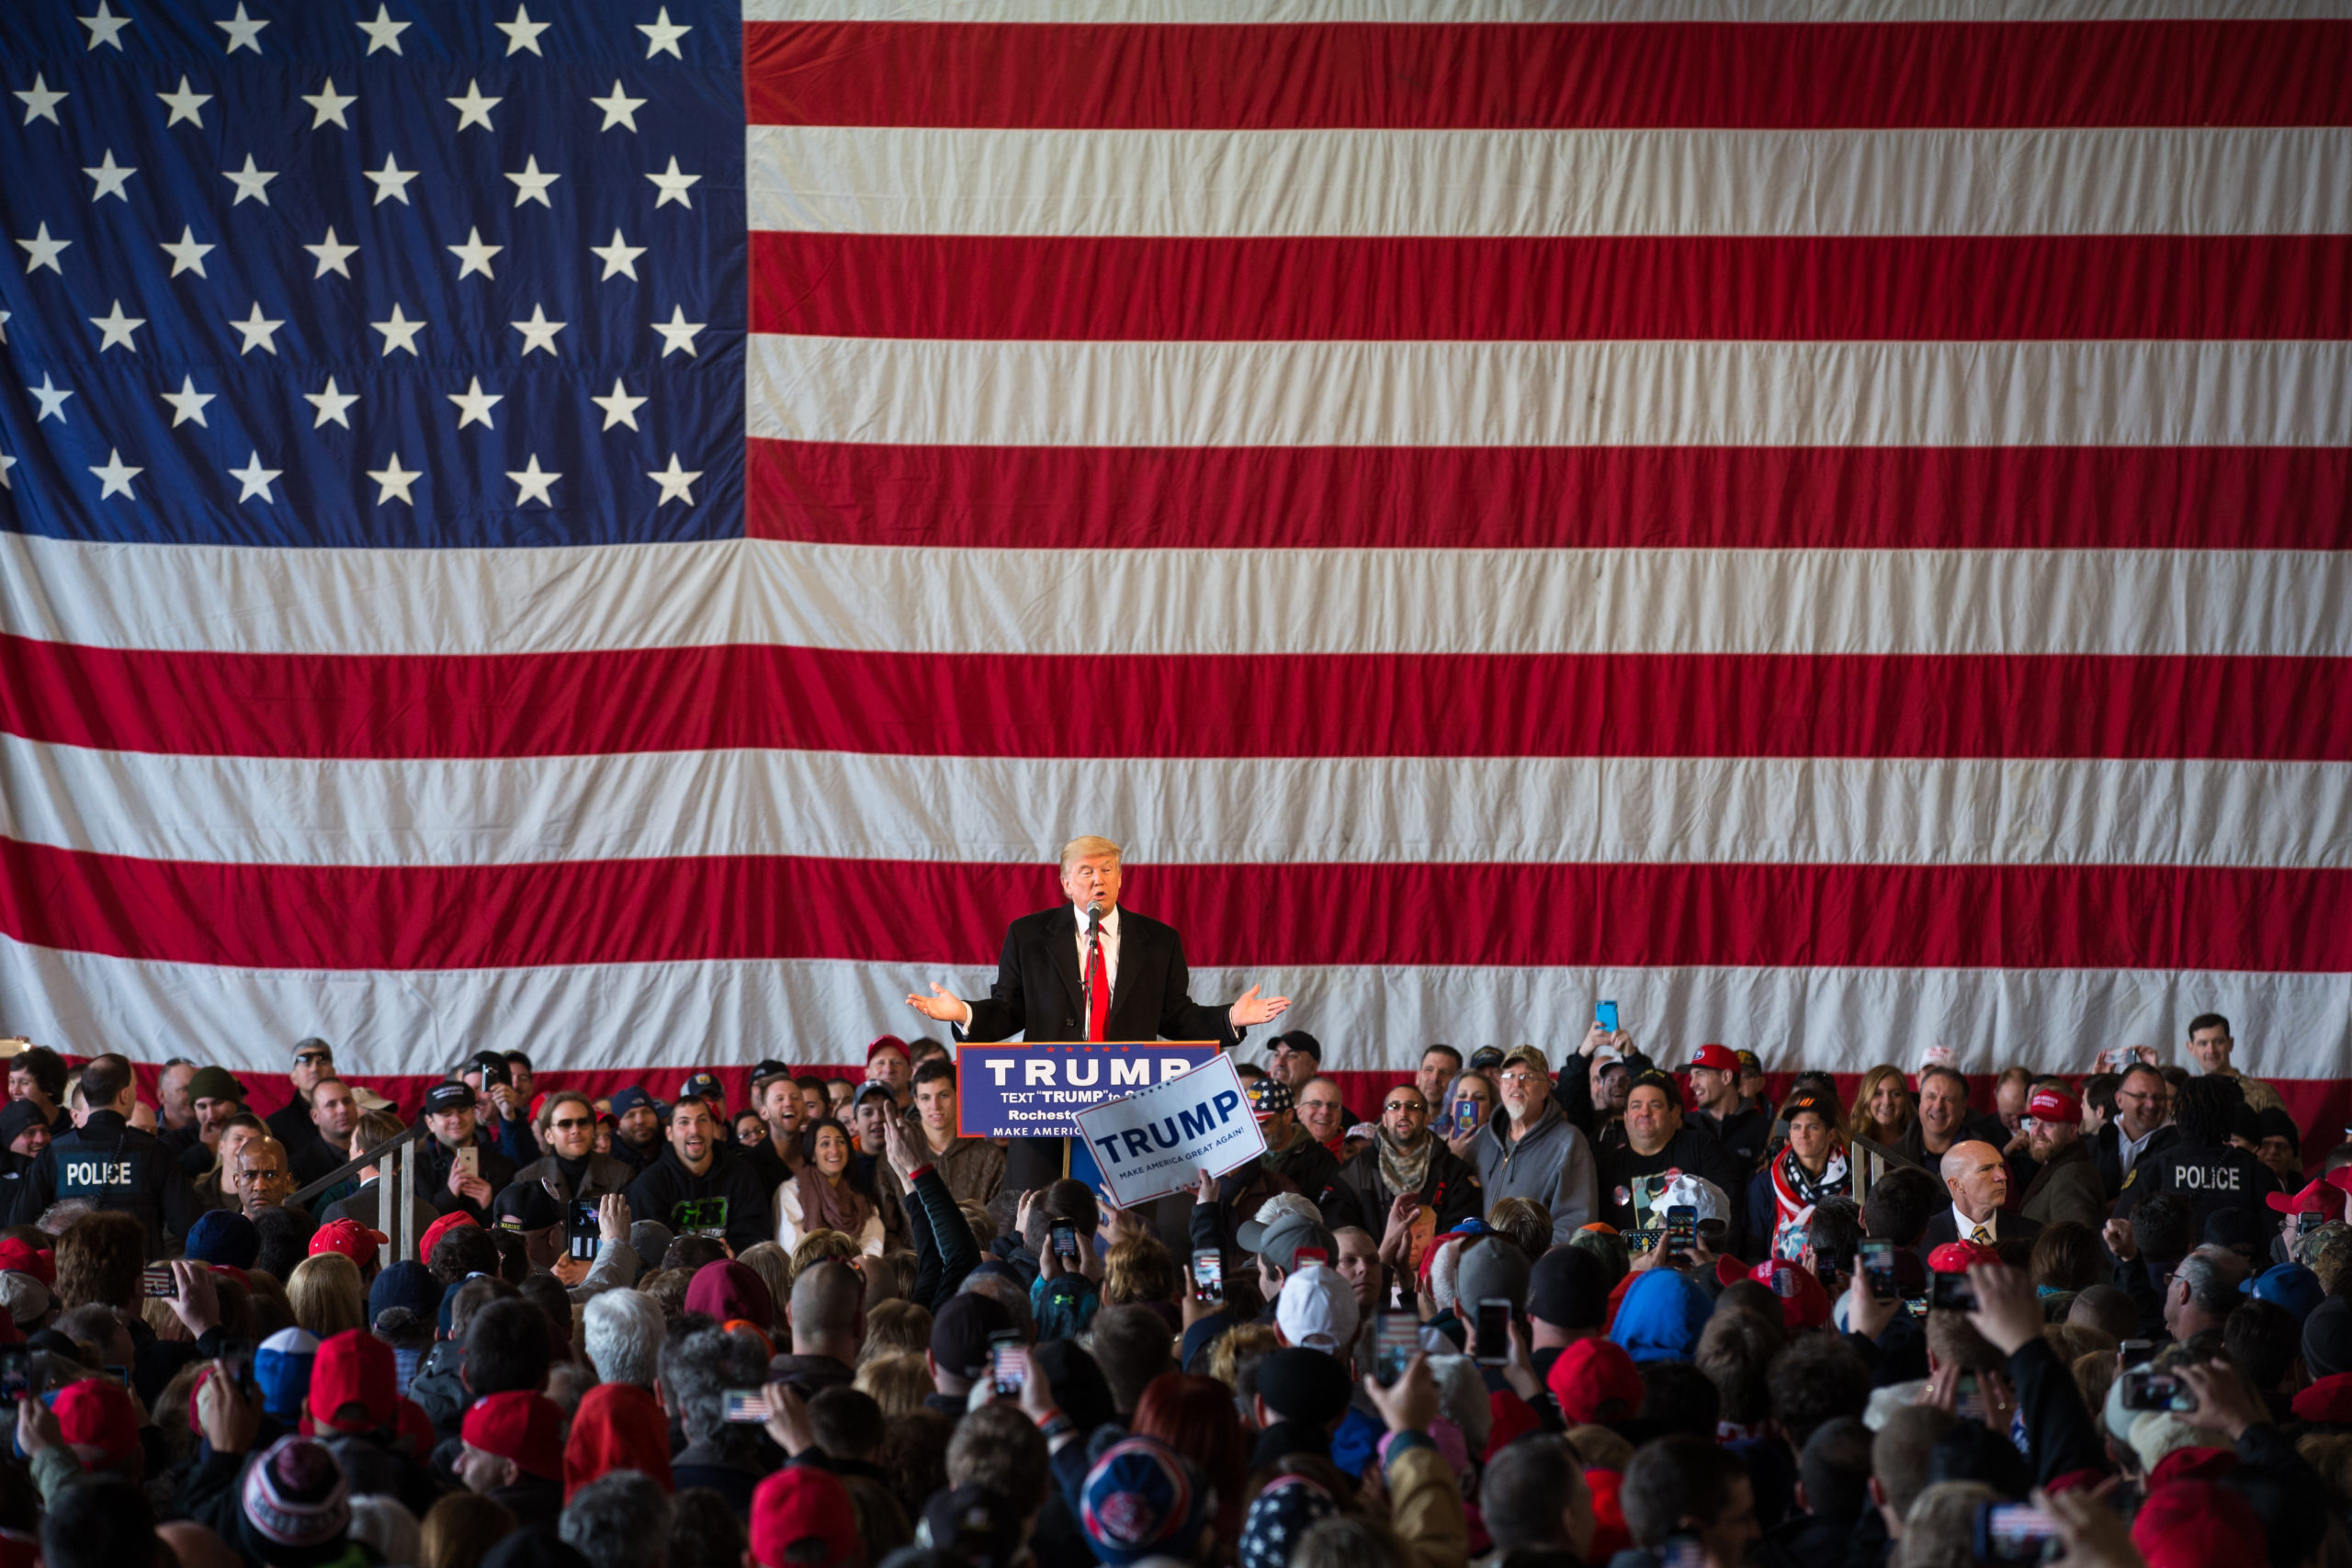 Former President Donald Trump speaks during a campaign rally on April 10, 2016 in Rochester, New York. (Brett Carlsen/Getty Images)